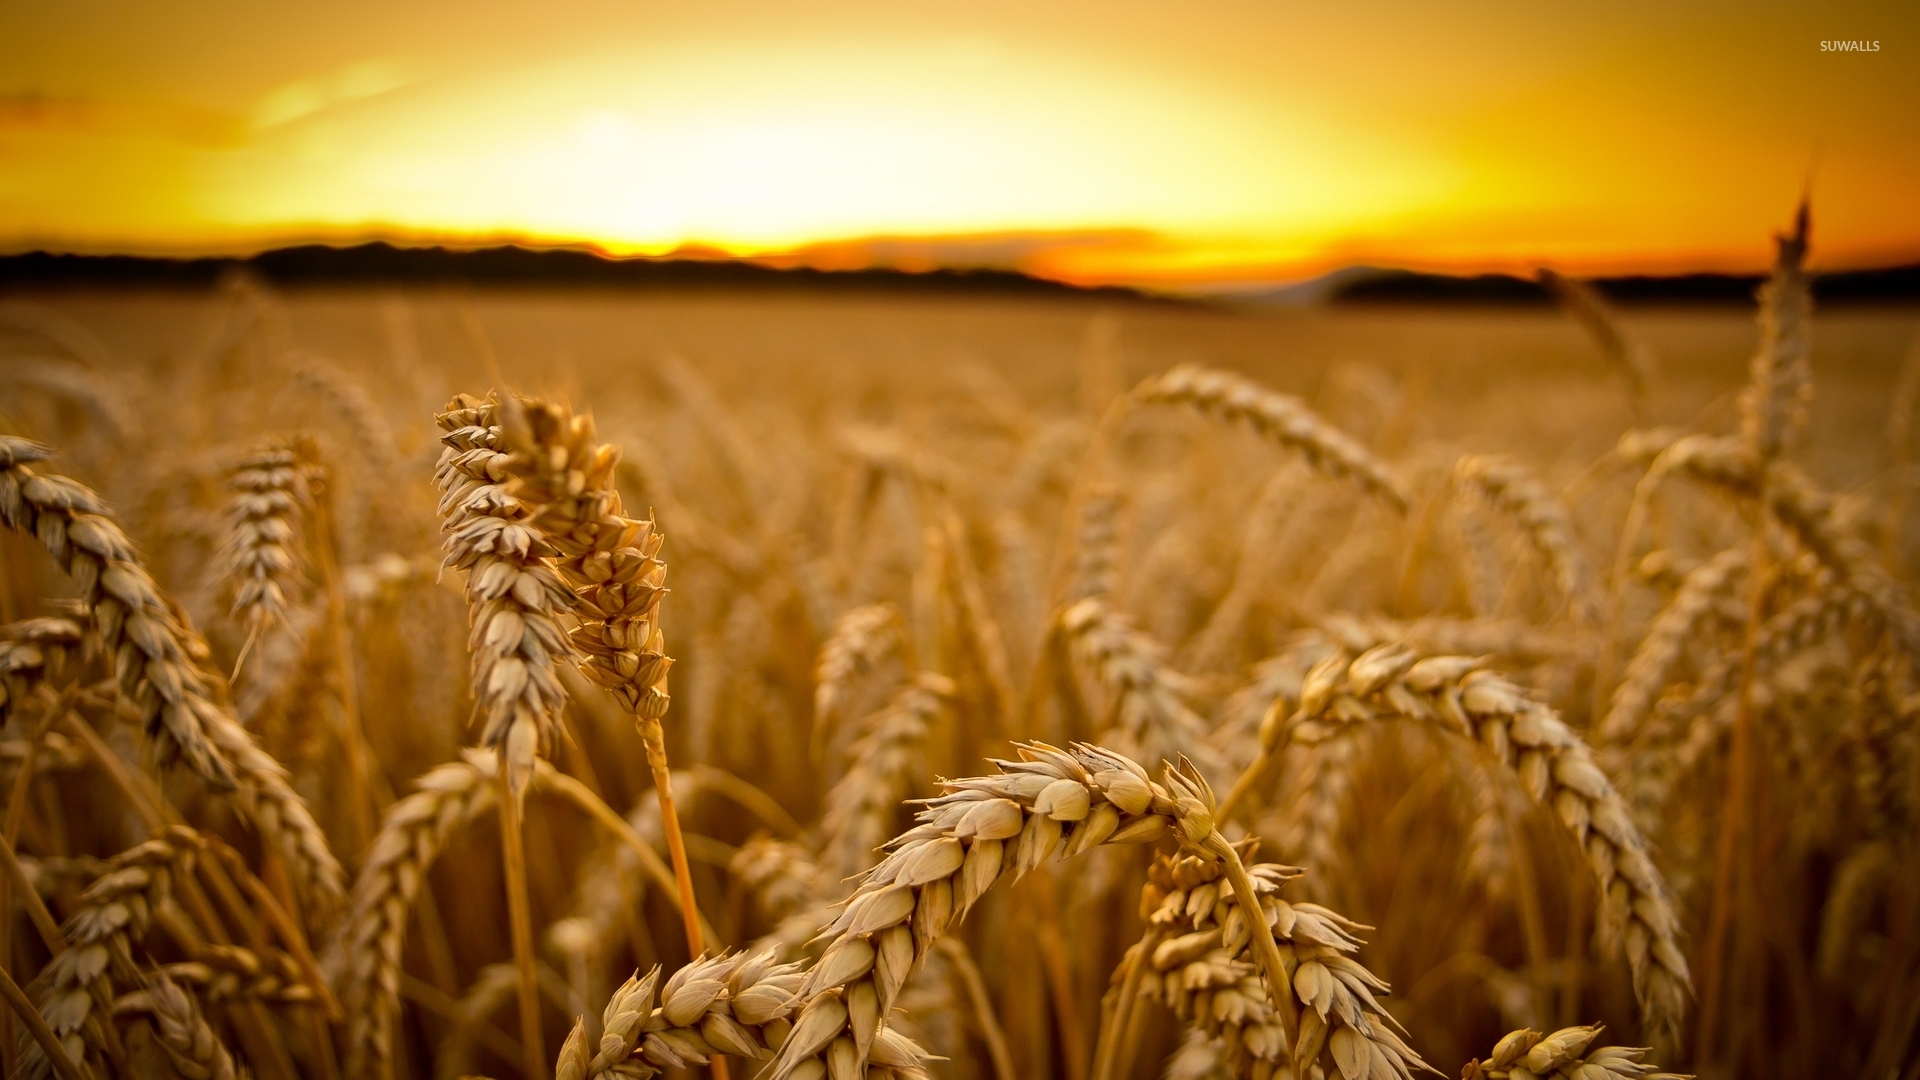 Wheat at sunset wallpaper - Photography wallpapers - #35108